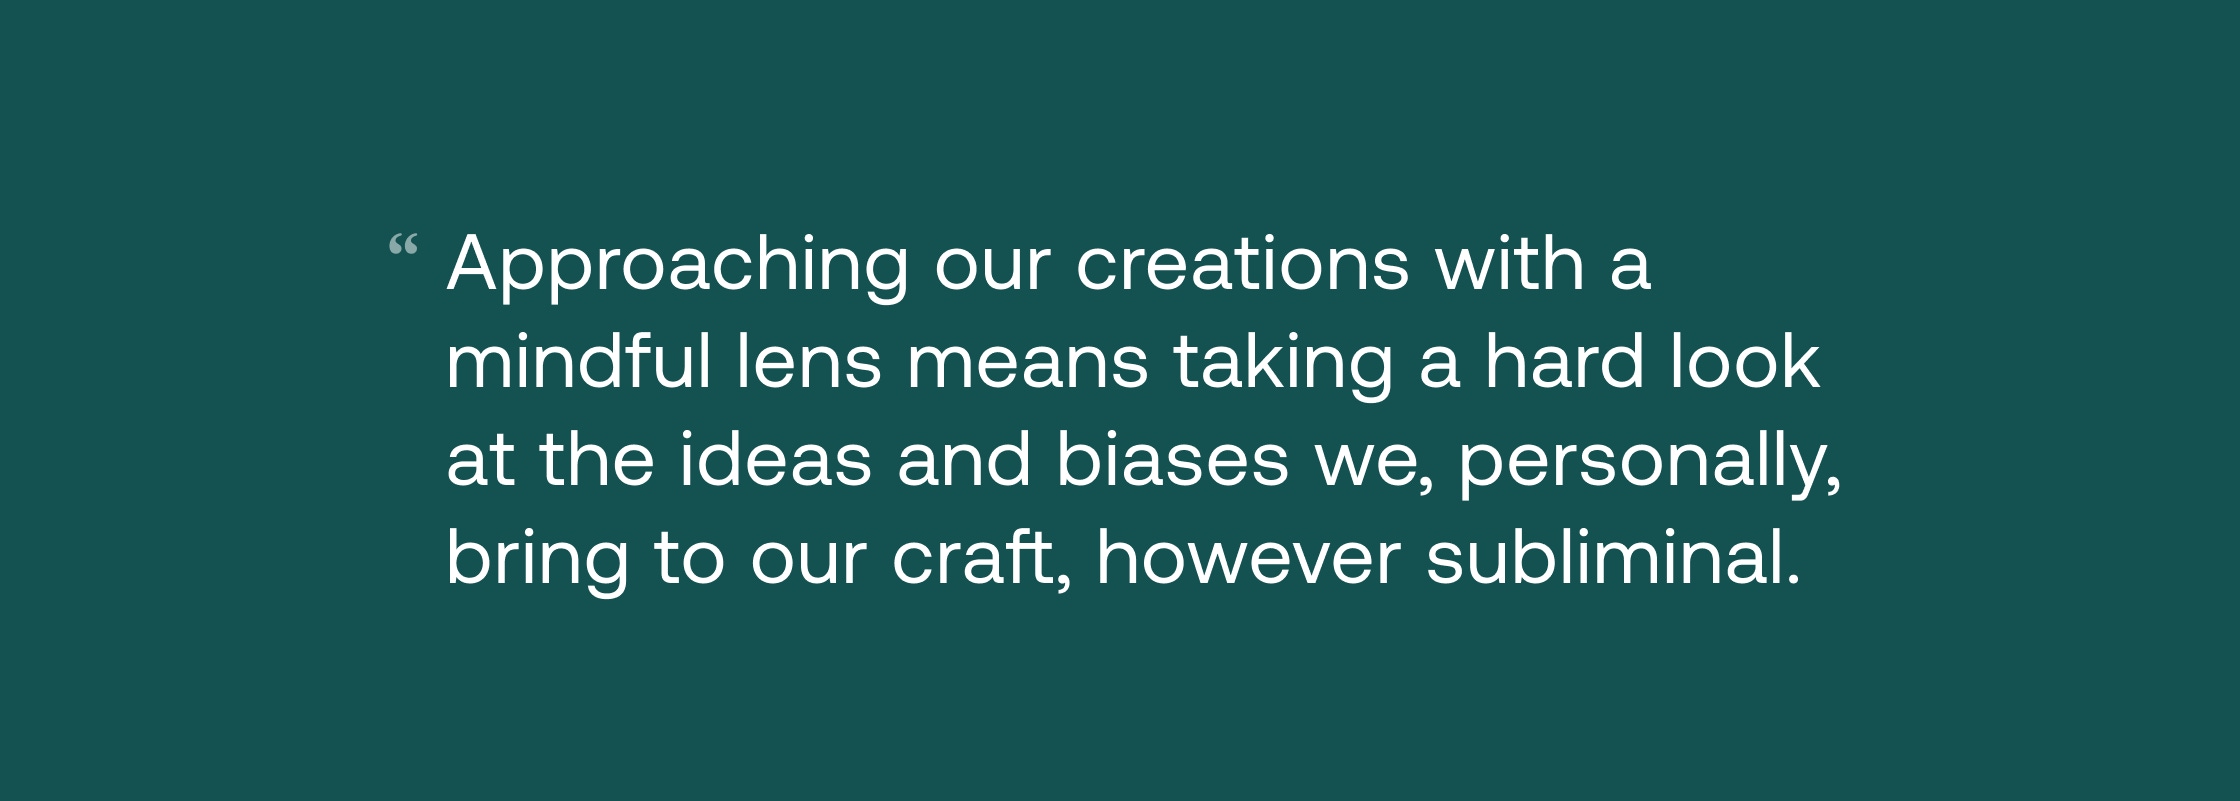 Approaching our creations with a mindful lens means taking a hard look at the ideas and biases we, personally, bring to our craft, however subliminal.